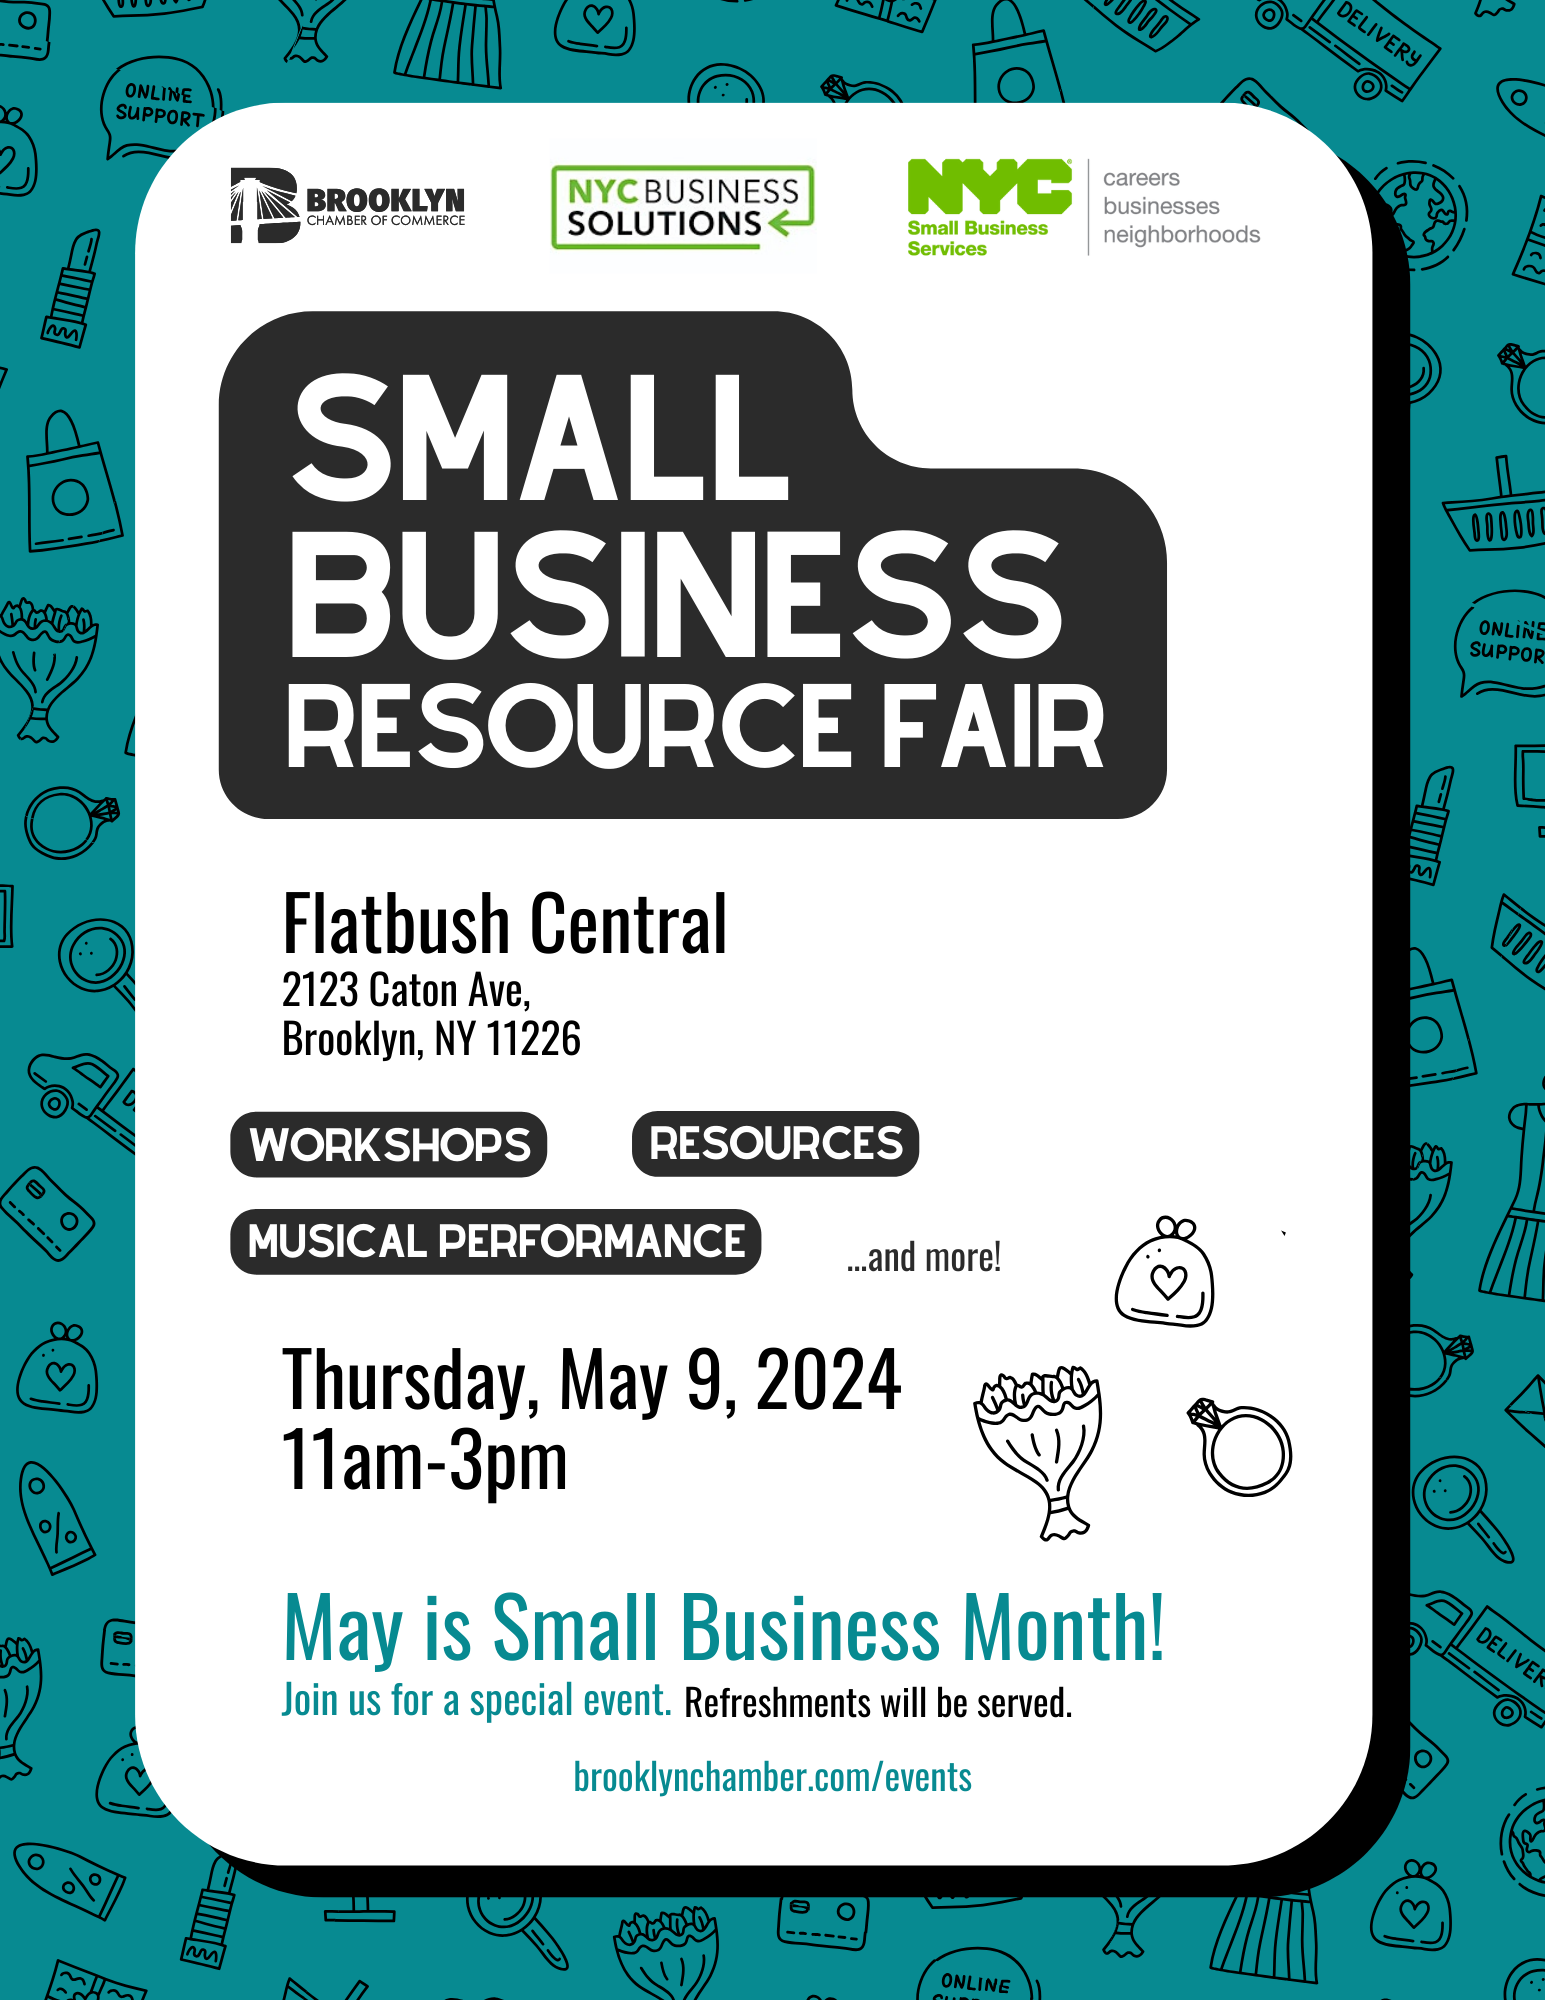 Small Business Resource Fair flyer with text: May is Small Business Month! Join us for a special event. Refreshments will be served. Featuring... Workshops Resources Musical Performance ... and more!